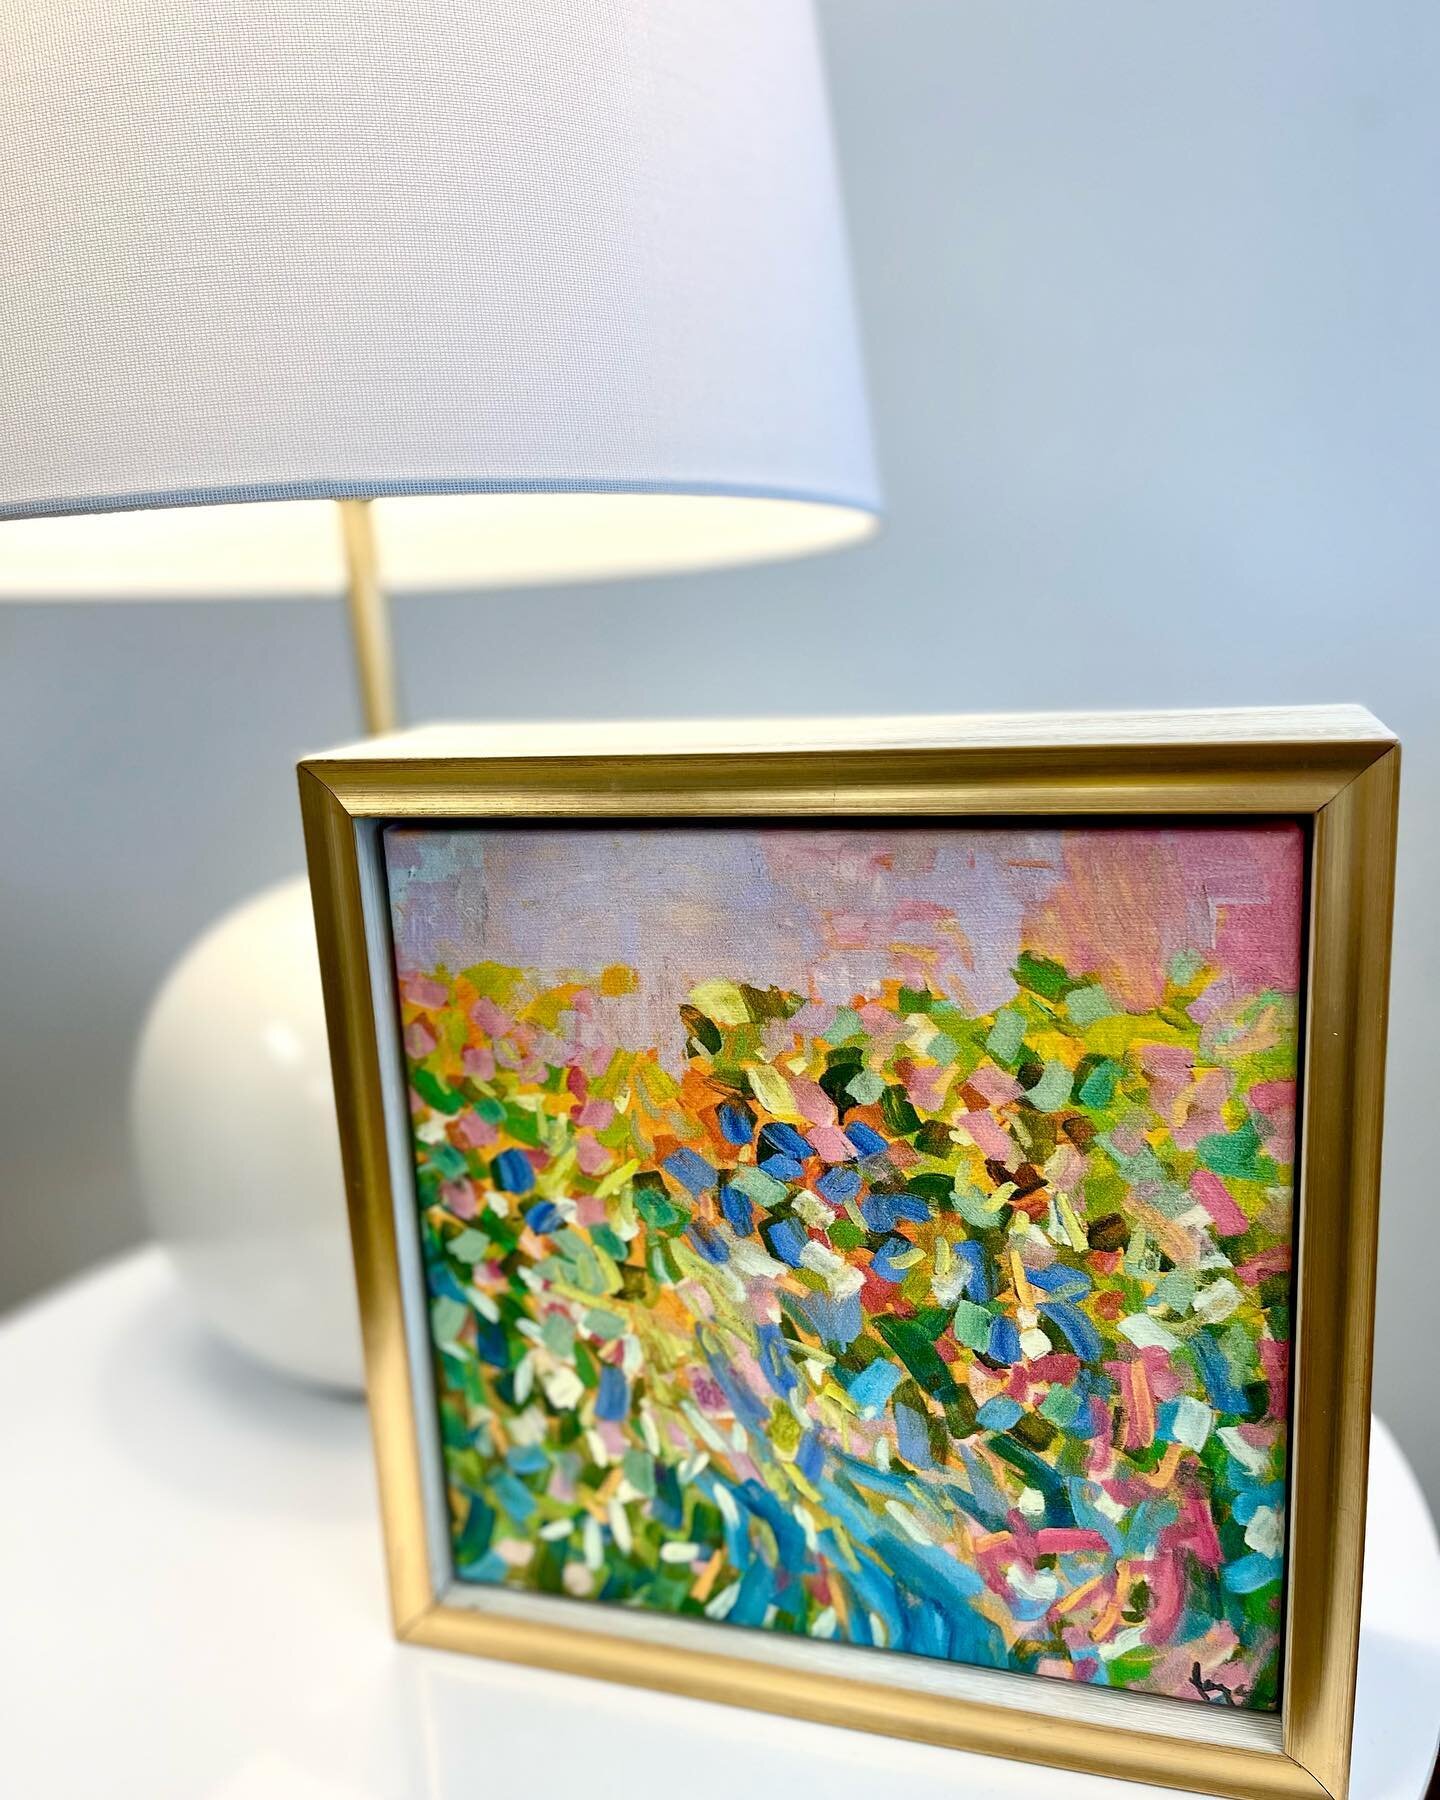 Need to add a pop of color to your room? Our new canvas small arts are so fun! They have a box frame so you can place them on a shelf or table or hang them on the wall. 

Several of the prints are a collection so you can group them together. Or just 